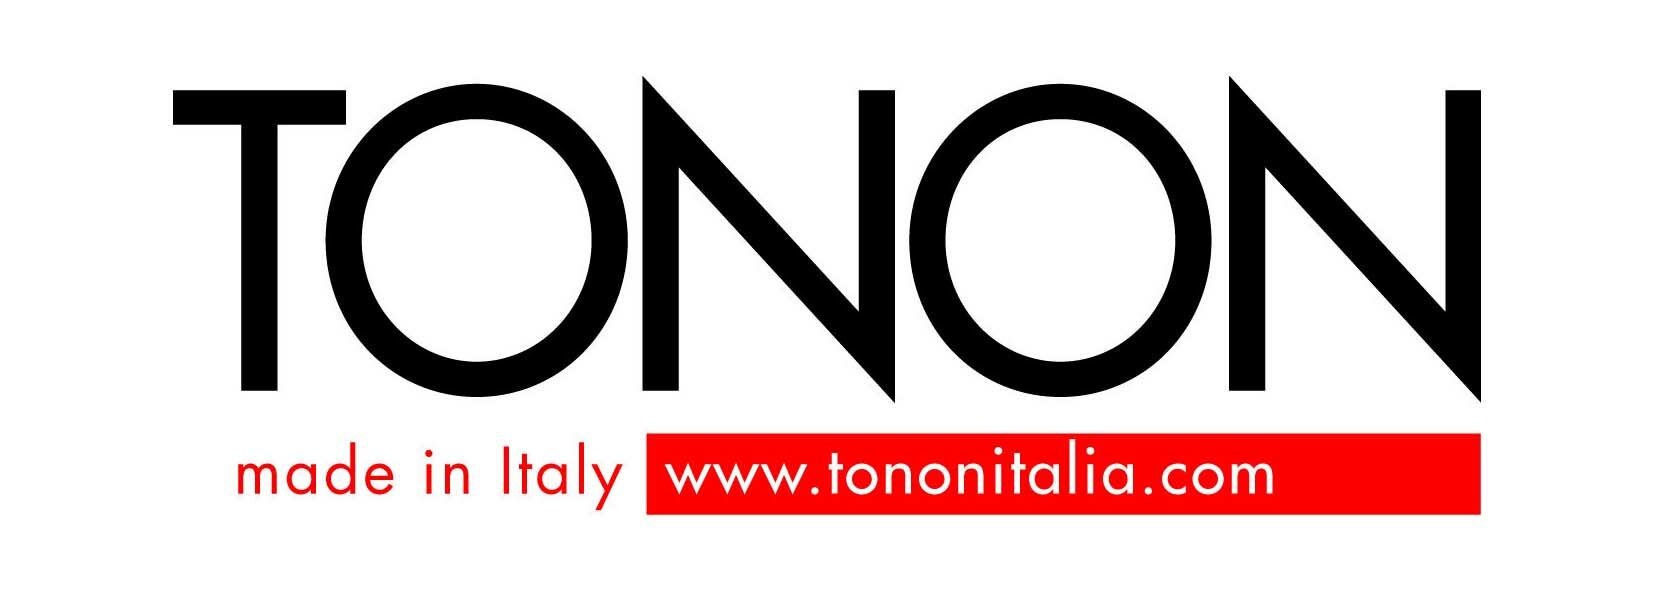 Since 1926 Tonon is a well-known international brand in the world of seating, reliable and synonymous with design and quality MADE IN ITALY.